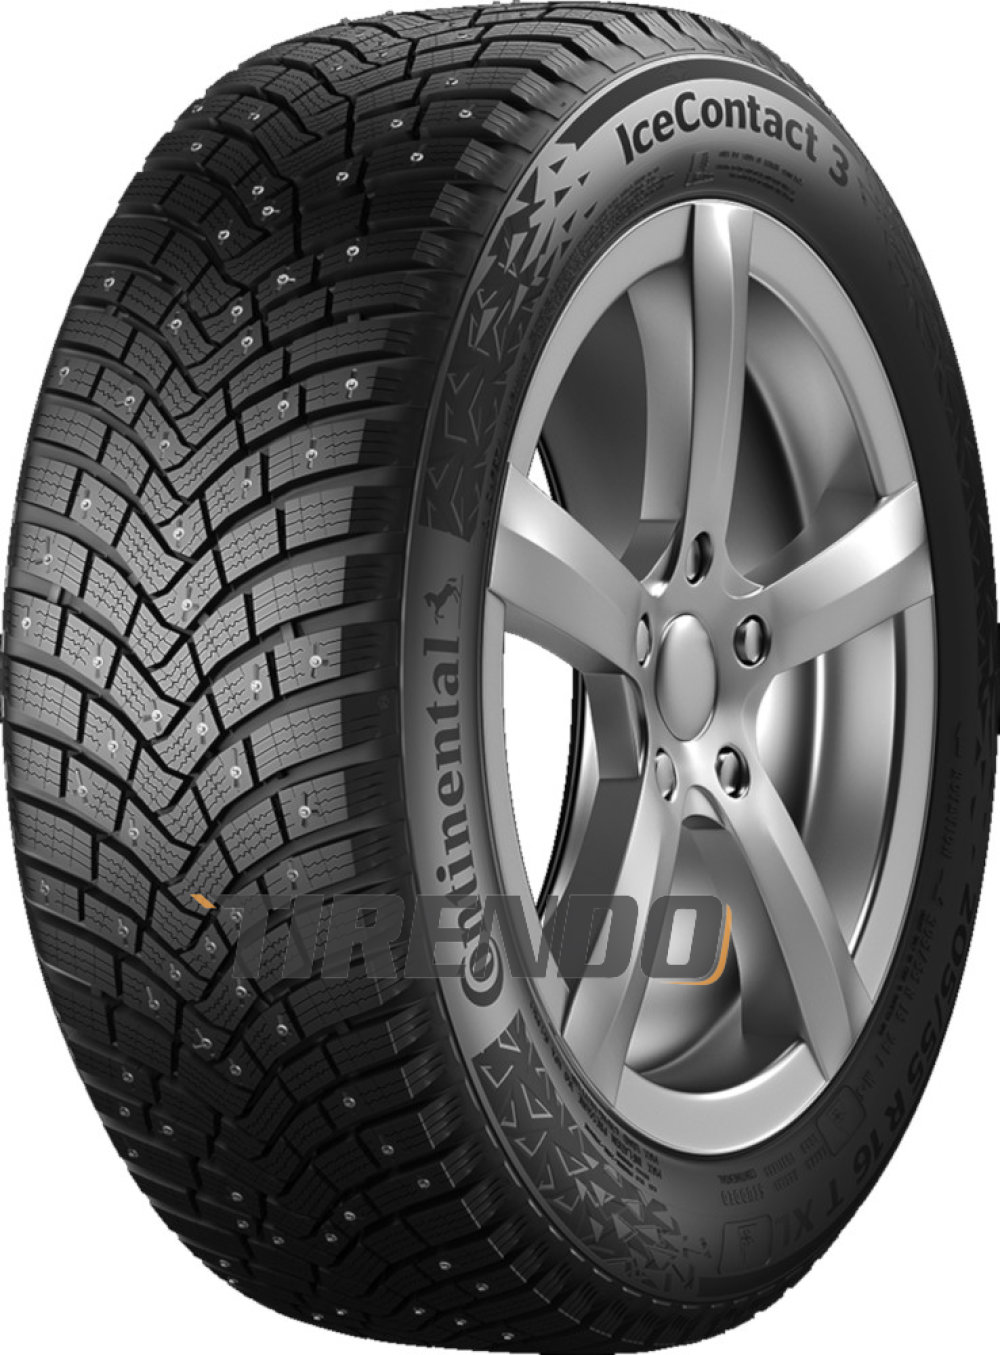 Continental IceContact 3 ( 245/45 R18 100T XL, bespiked ) von Continental